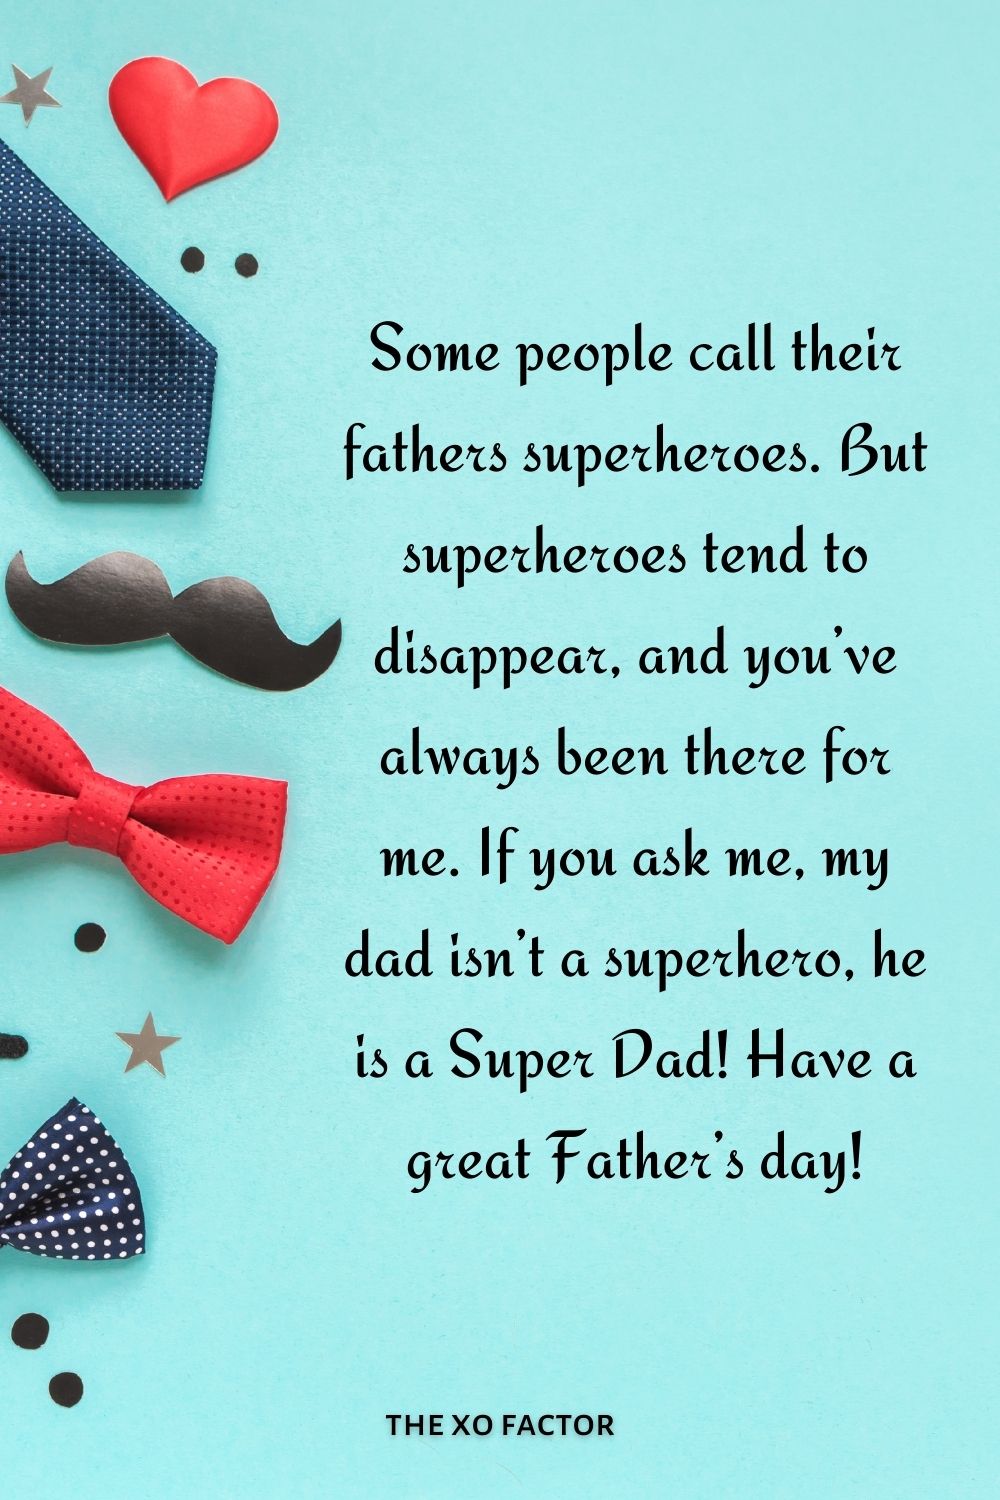 Some people call their fathers superheroes. But superheroes tend to disappear, and you’ve always been there for me. If you ask me, my dad isn’t a superhero, he is a Super Dad! Have a great Father’s day!